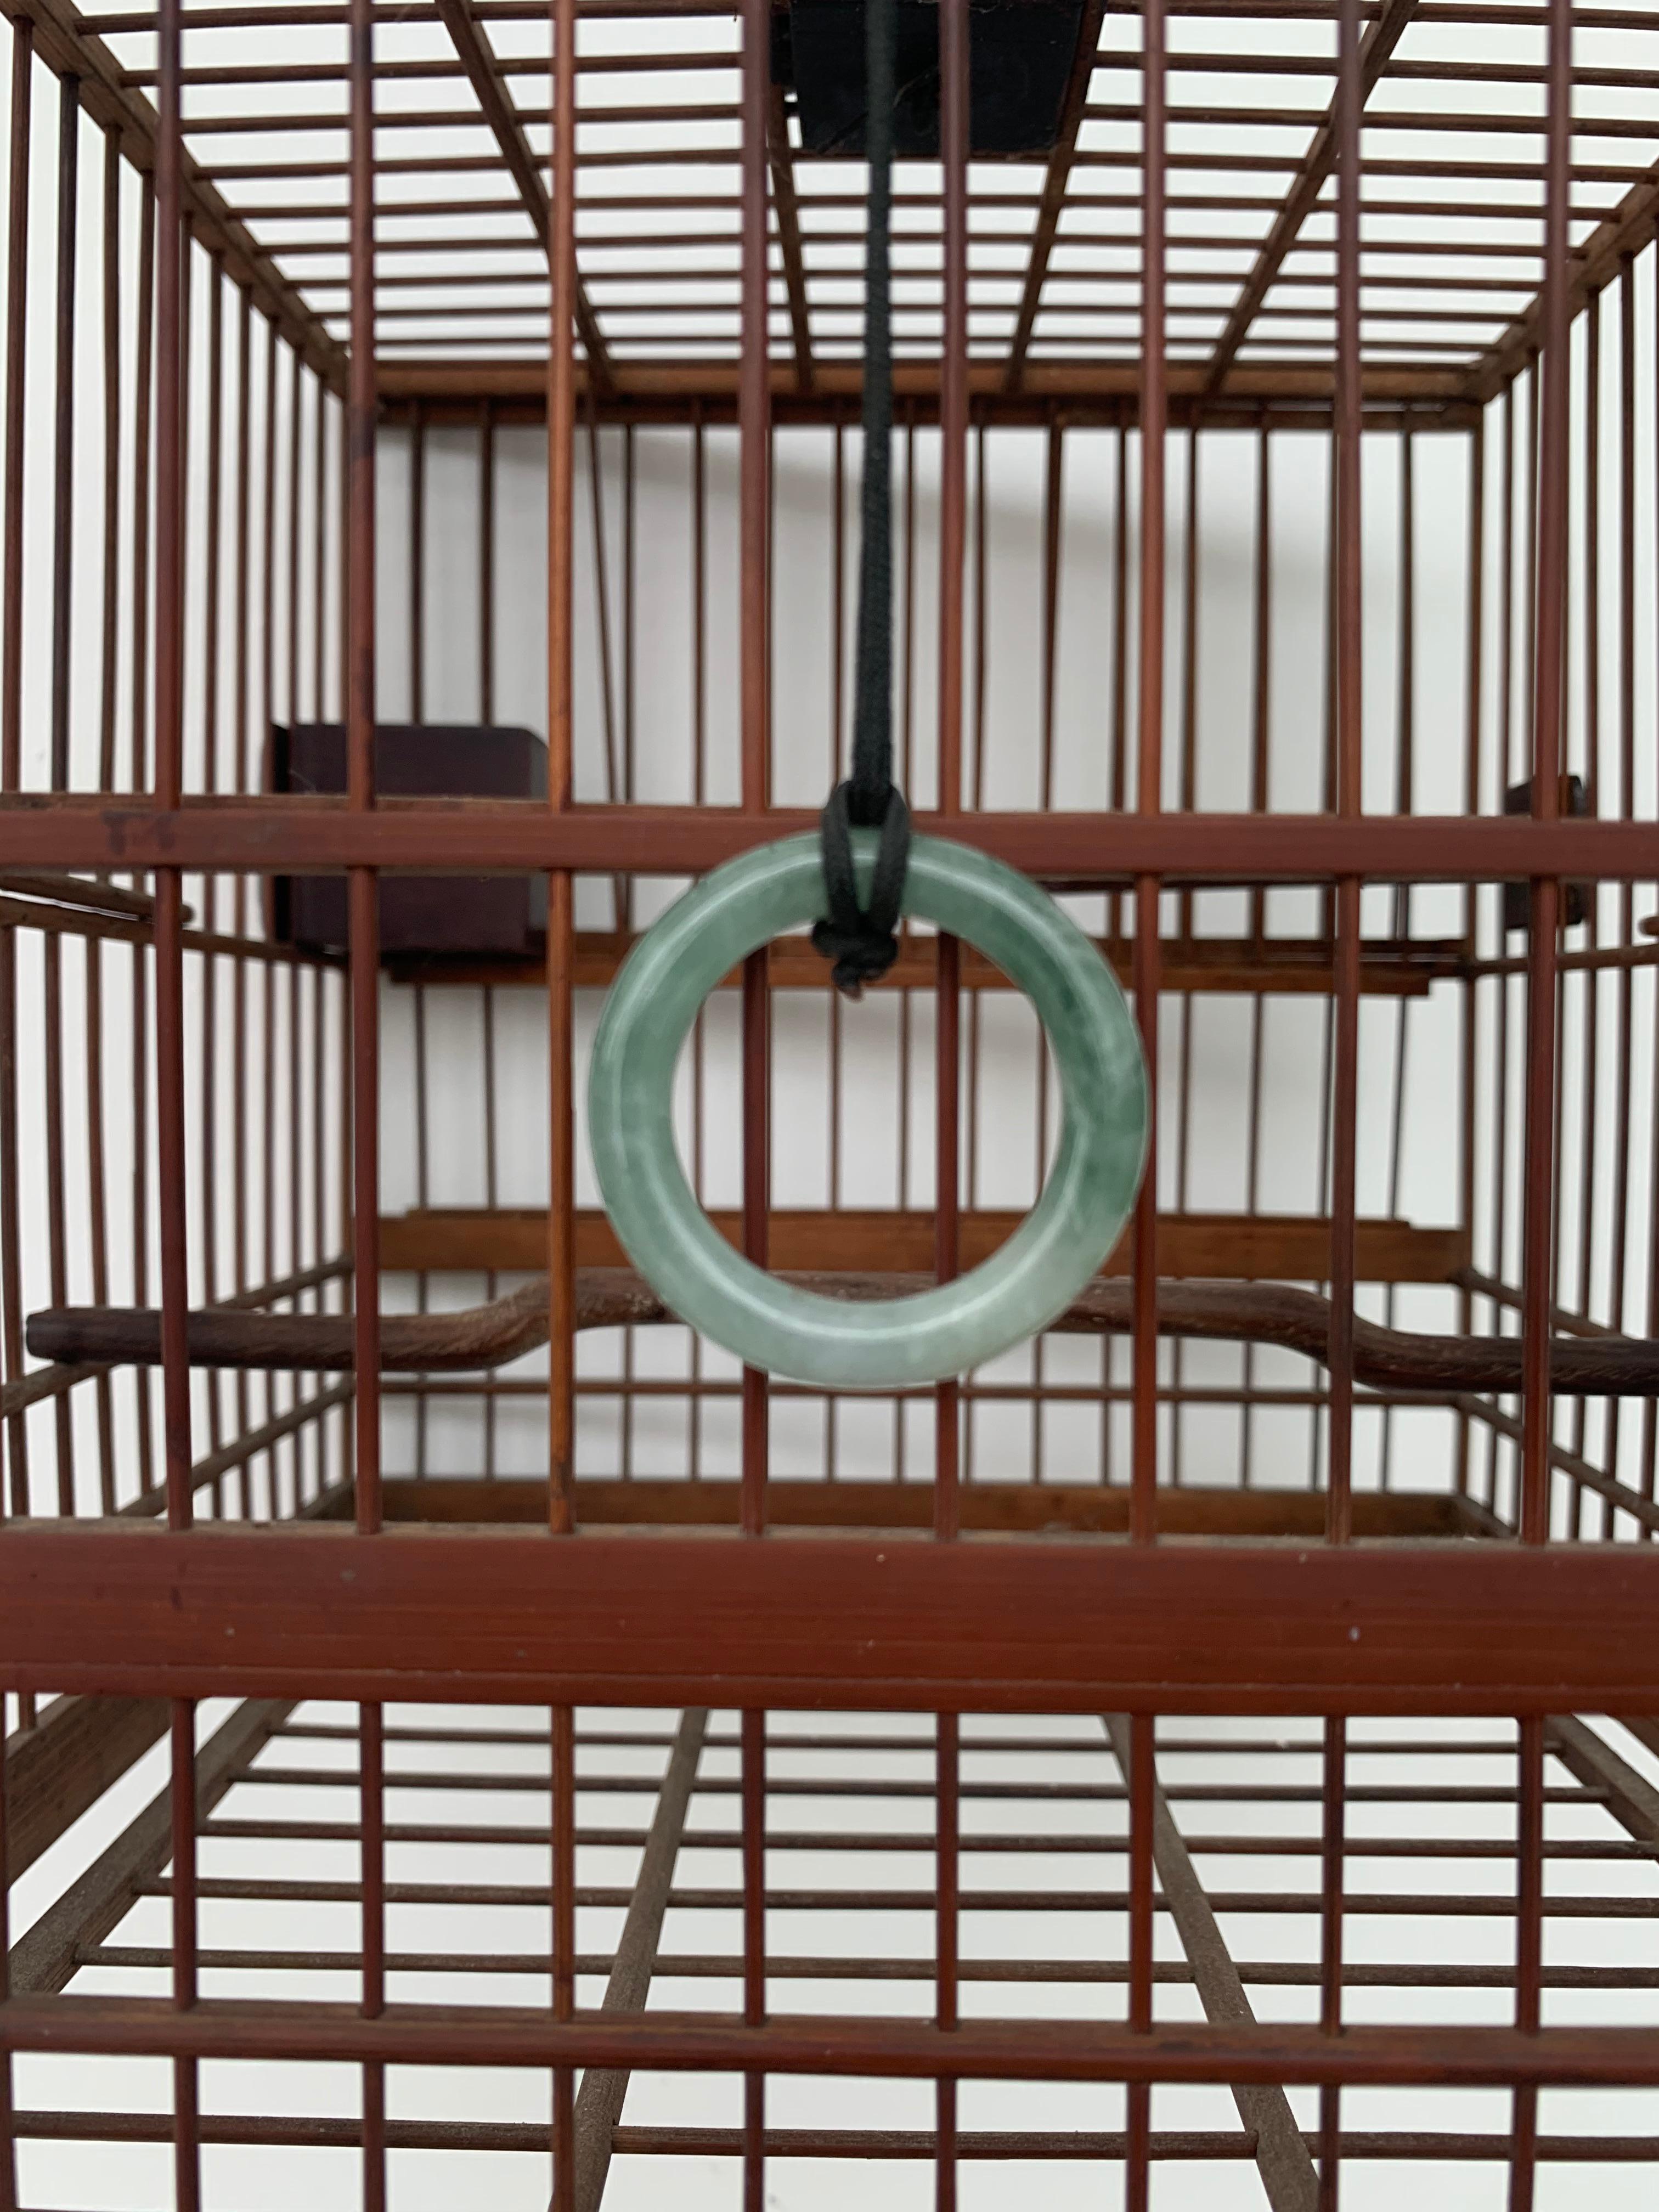 Chinese Birdcage with Porcelain Feeding Bowls, Vintage Mid-20th Century In Good Condition For Sale In Jimbaran, Bali